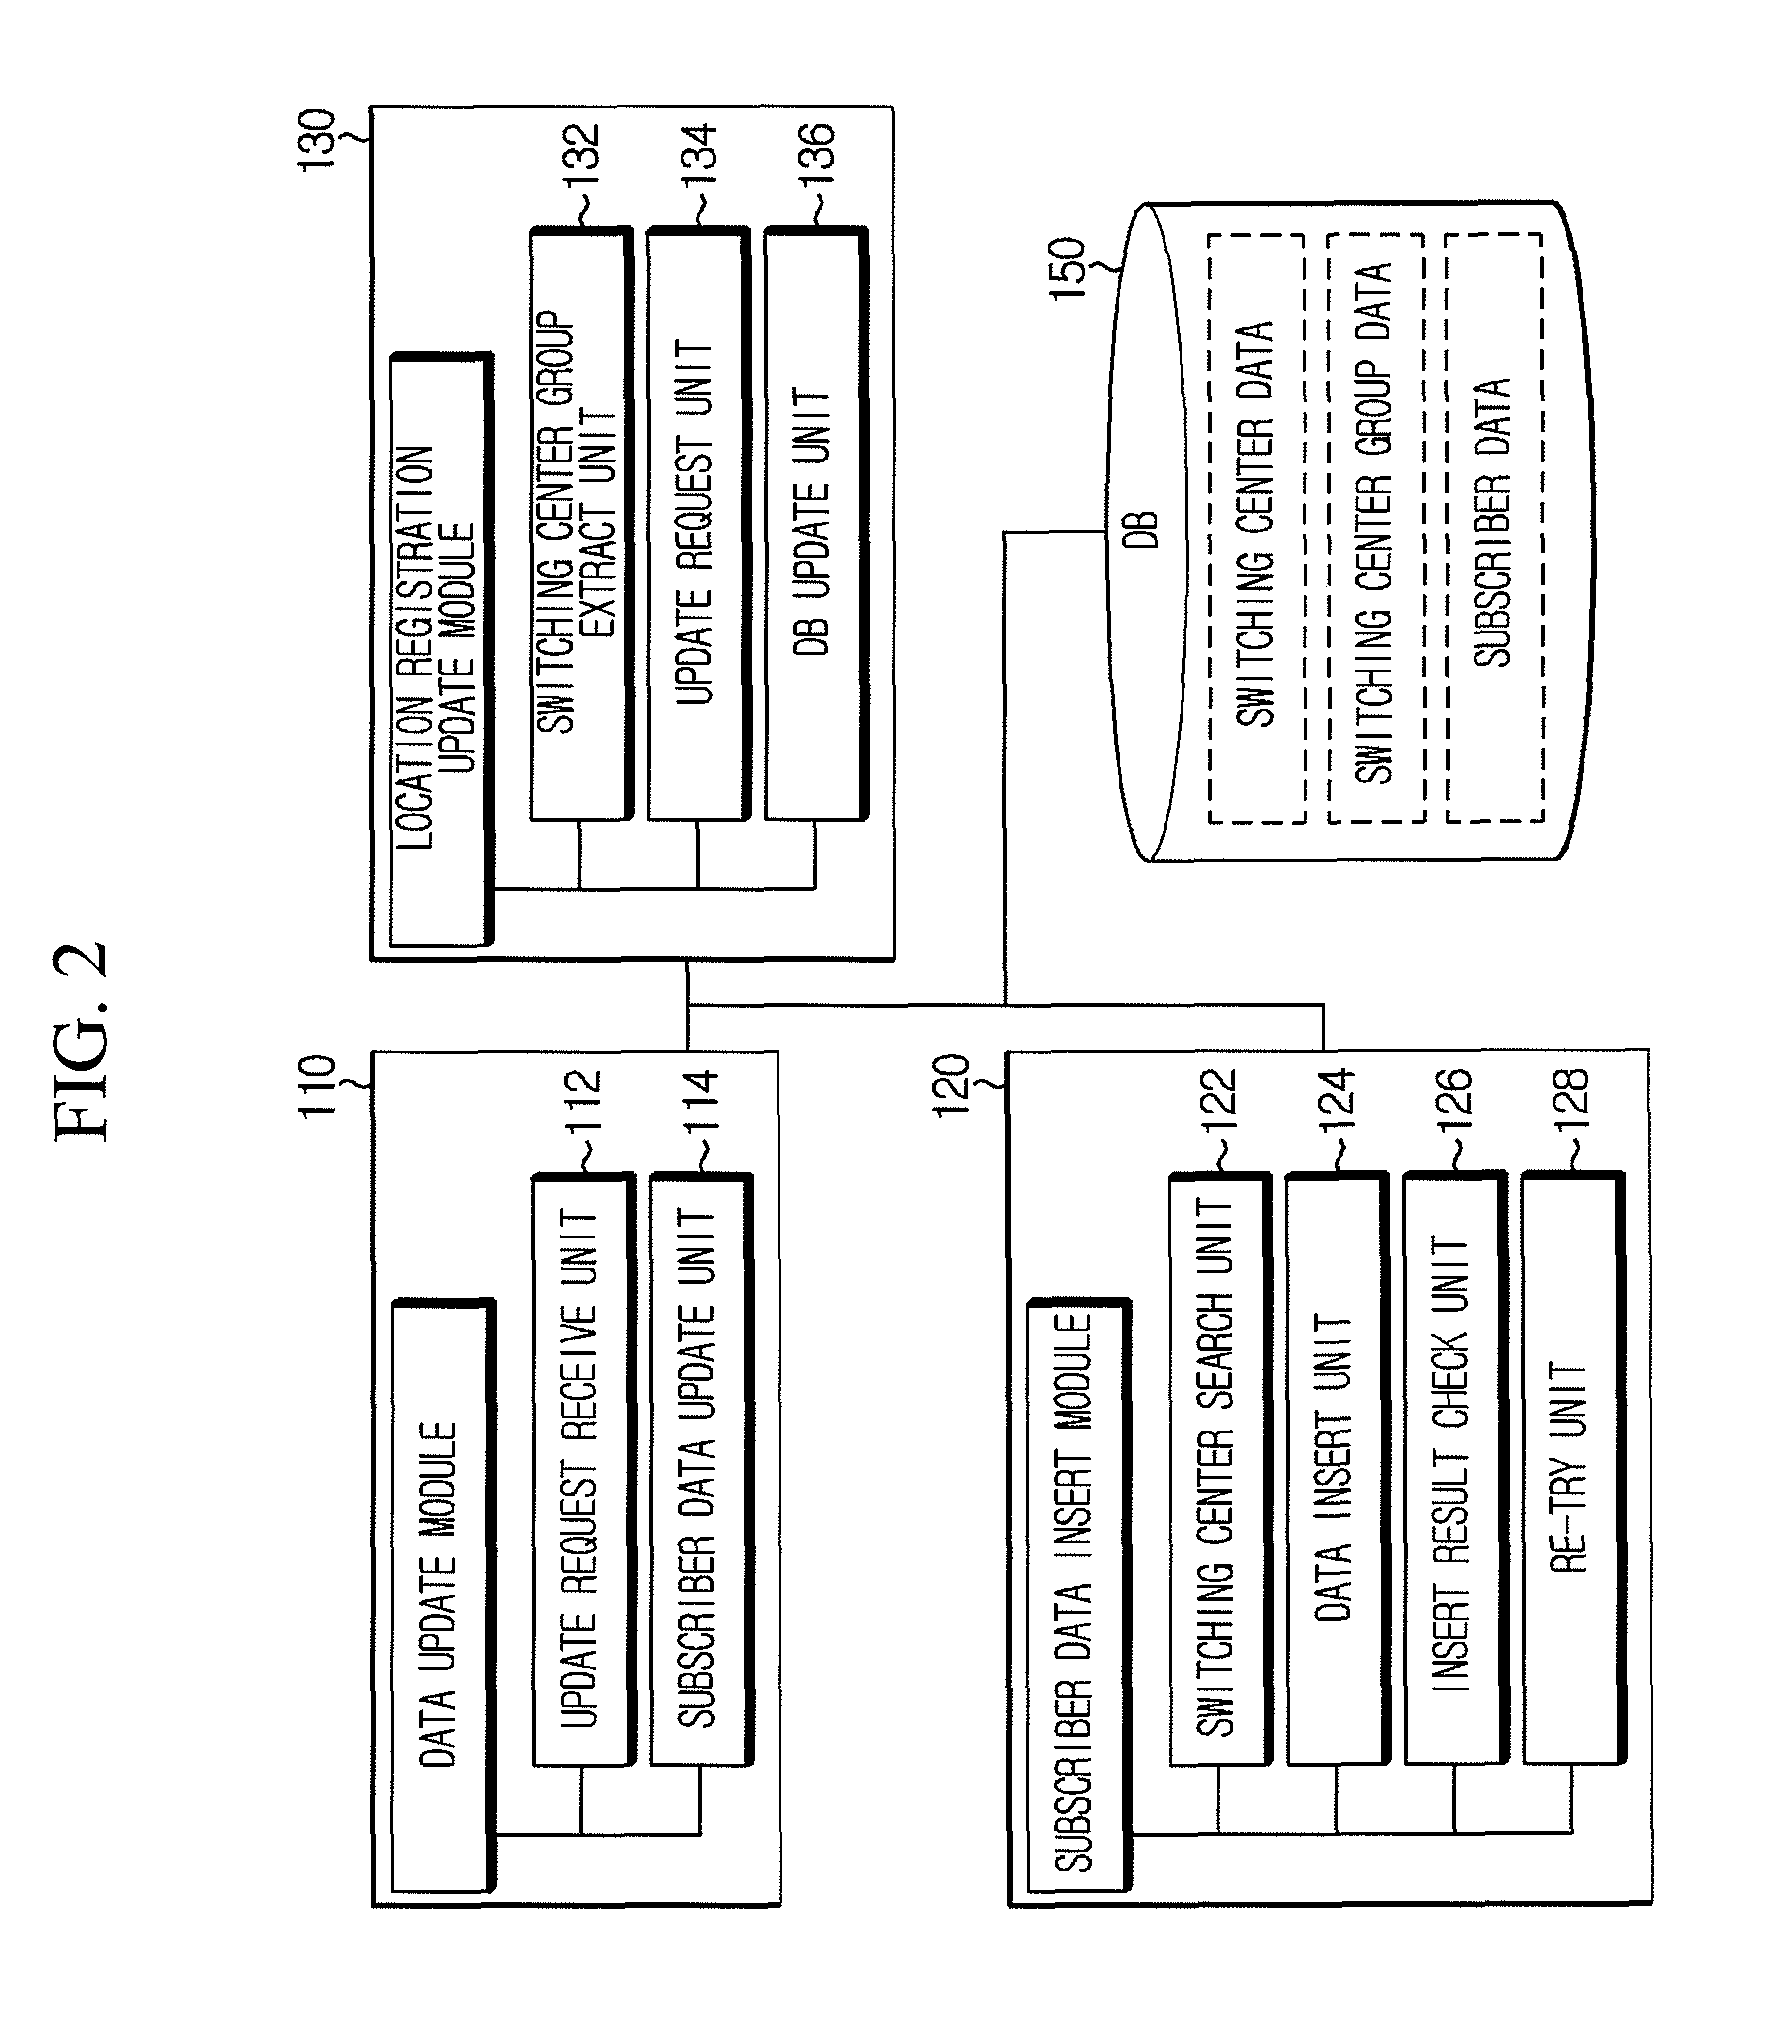 Method and apparatus for location registration update on failure to insert subscriber data in mobile communication system